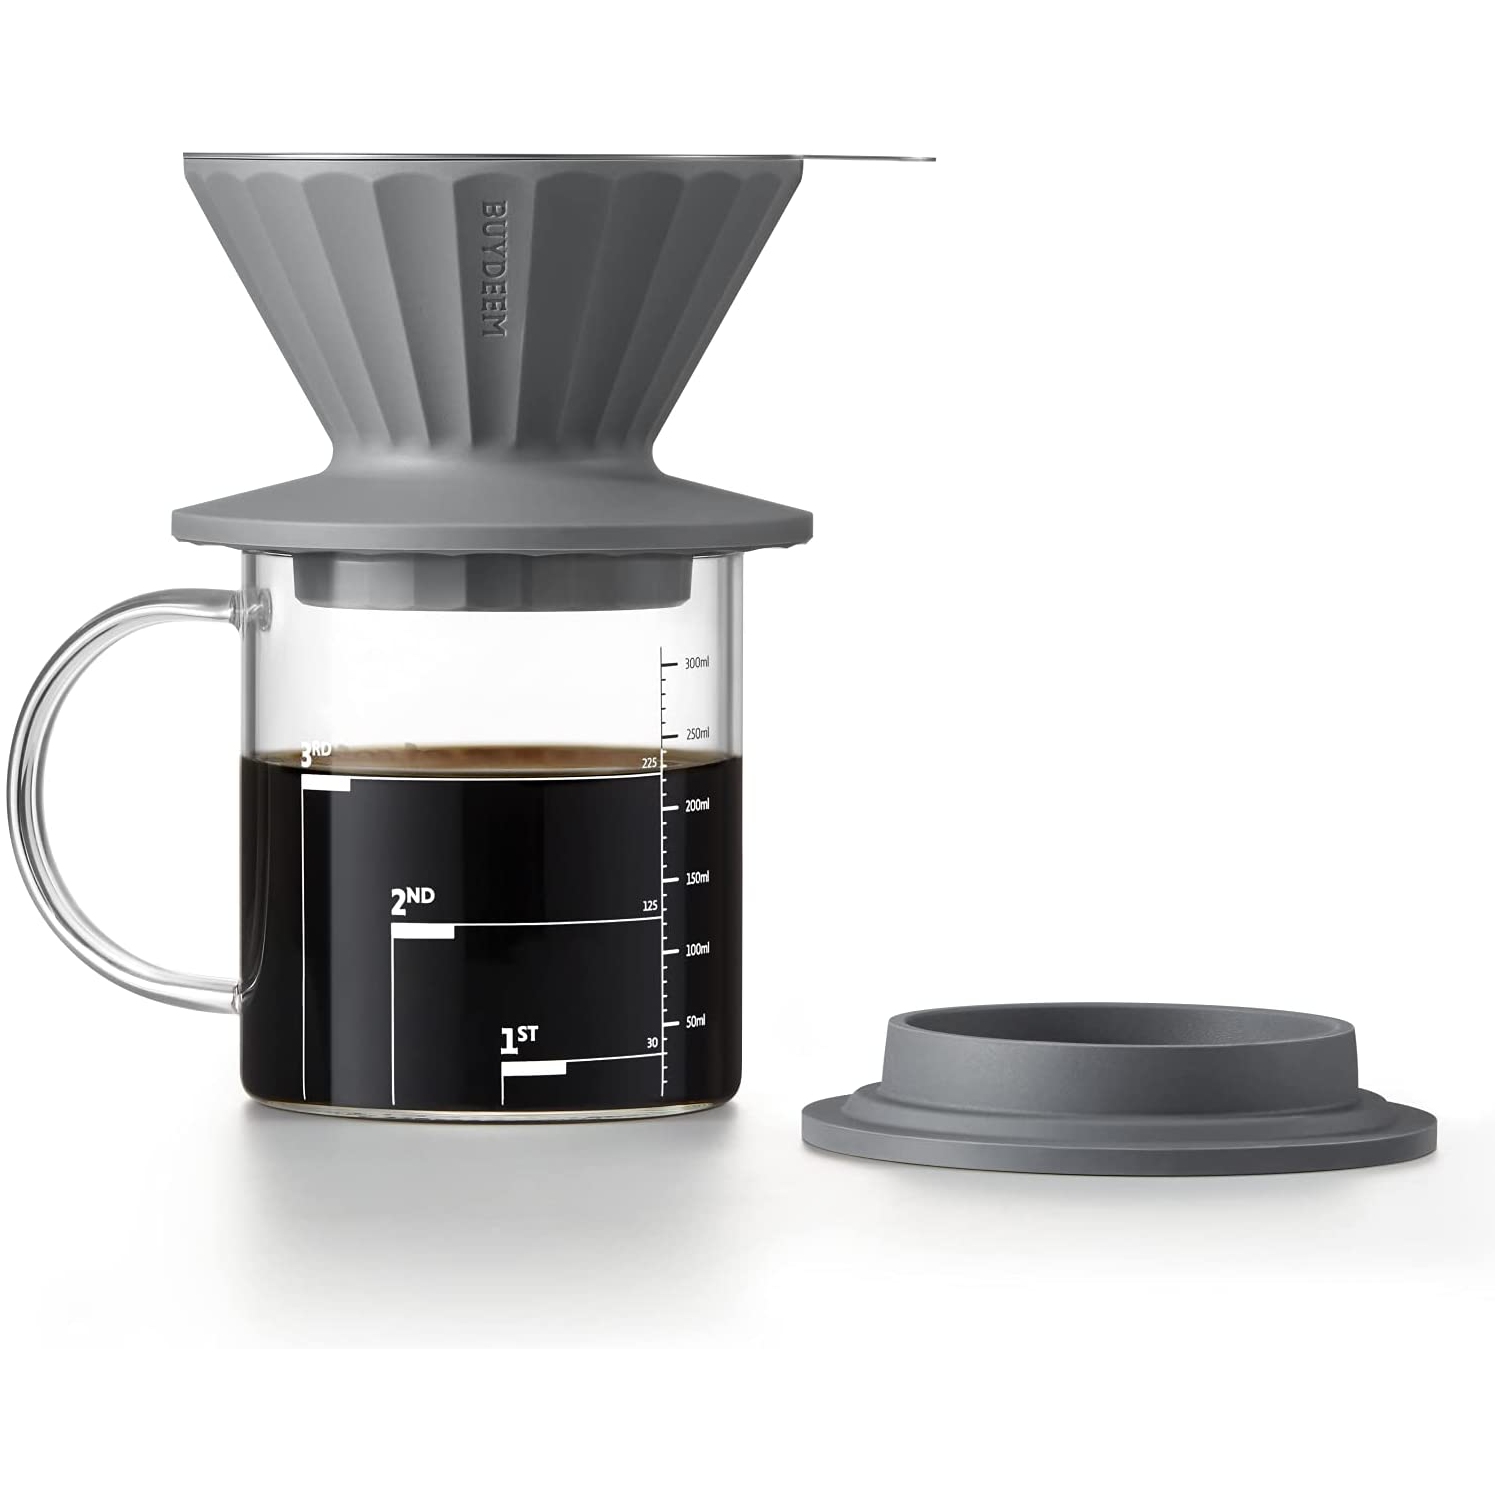 BUYDEEM CD1024B Pour Over Coffee Maker, BPA Free Food Grade Silicone Coffee Dripper Set, Reusable Stainless Steel Coffee Filter for Single Cup, Perfect for Home, Travel, 12 oz